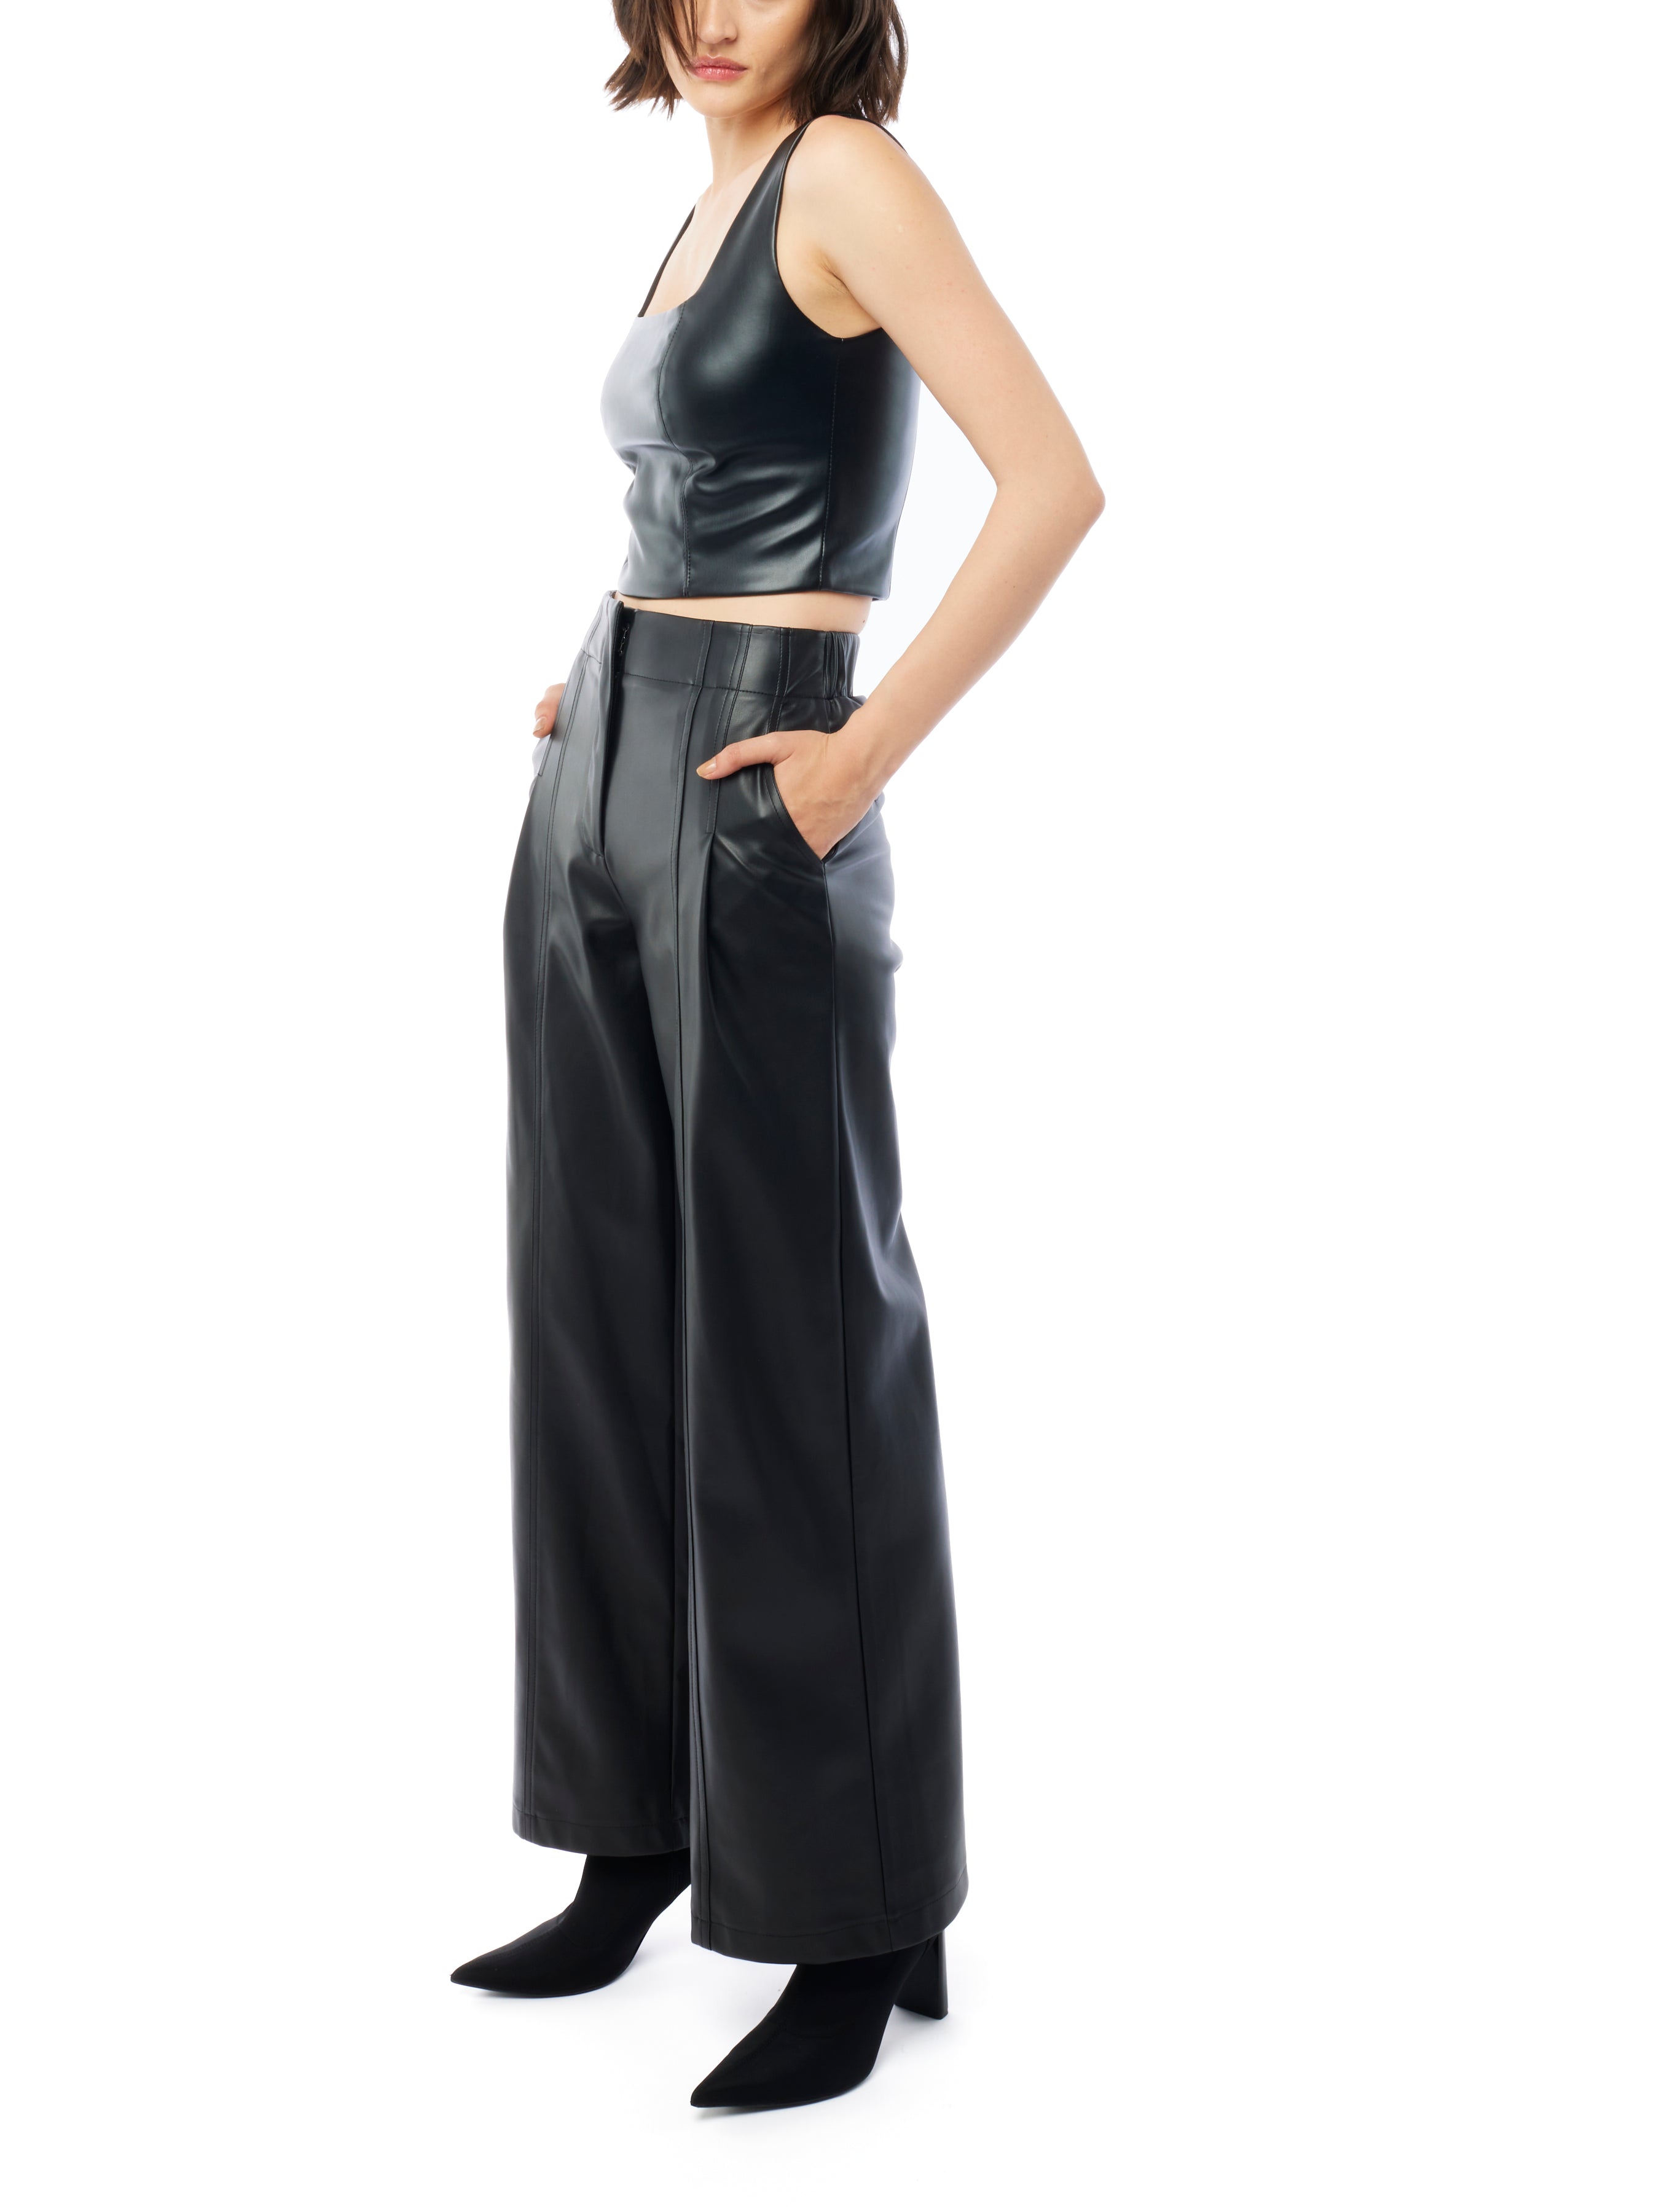 high-rise, faux leather wide leg pants with a pleated front and pockets in black